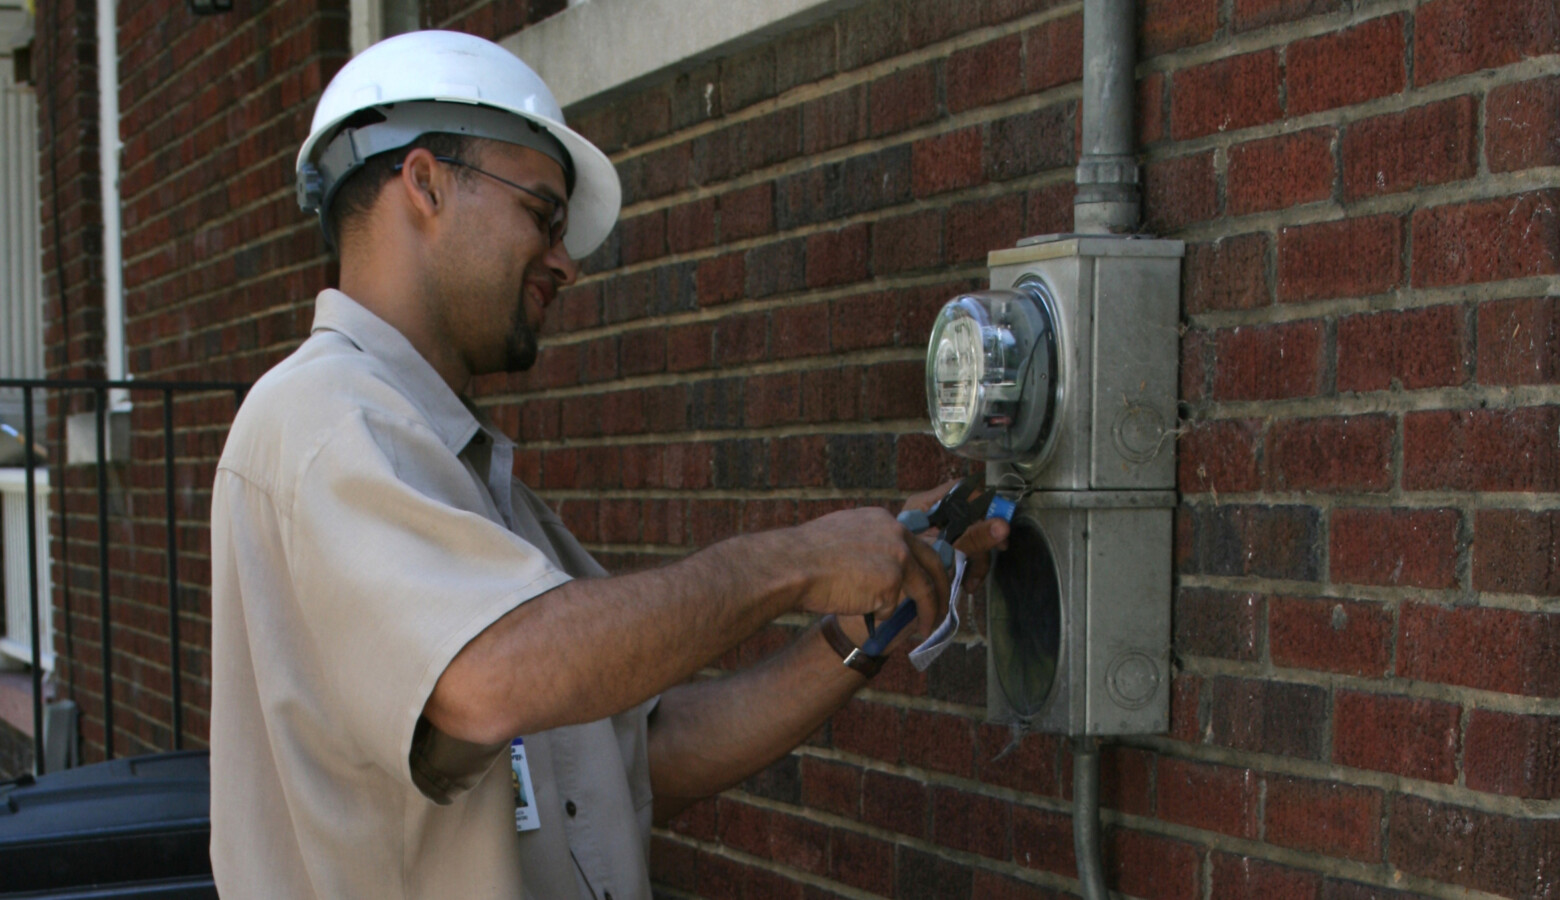 A Duke Energy technician disconnecting electricity at a residence due to nonpayment in North Carolina, 2008 (Ildar Sagdejev/Wikimedia Commons)